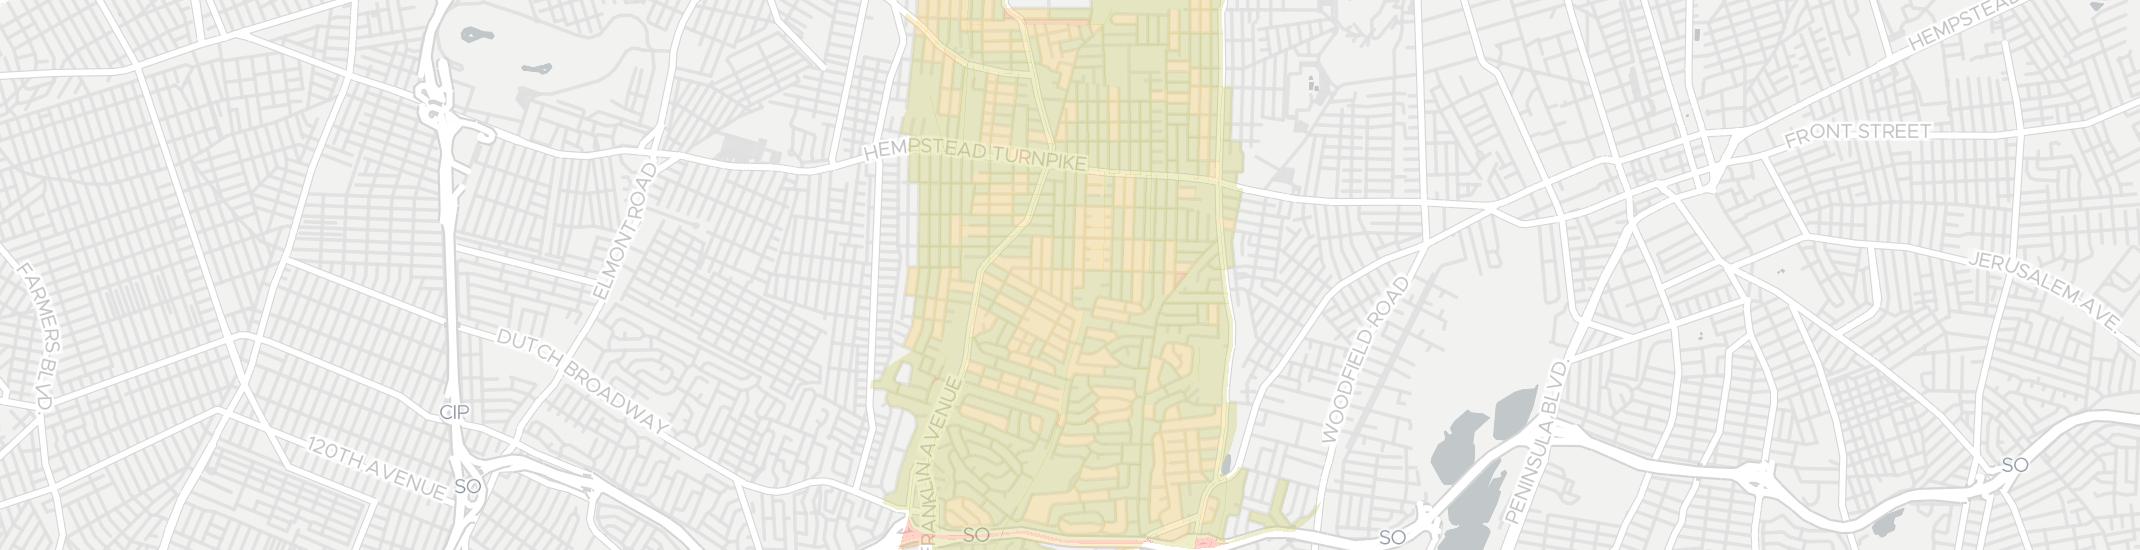 Franklin Square Internet Competition Map. Click for interactive map.